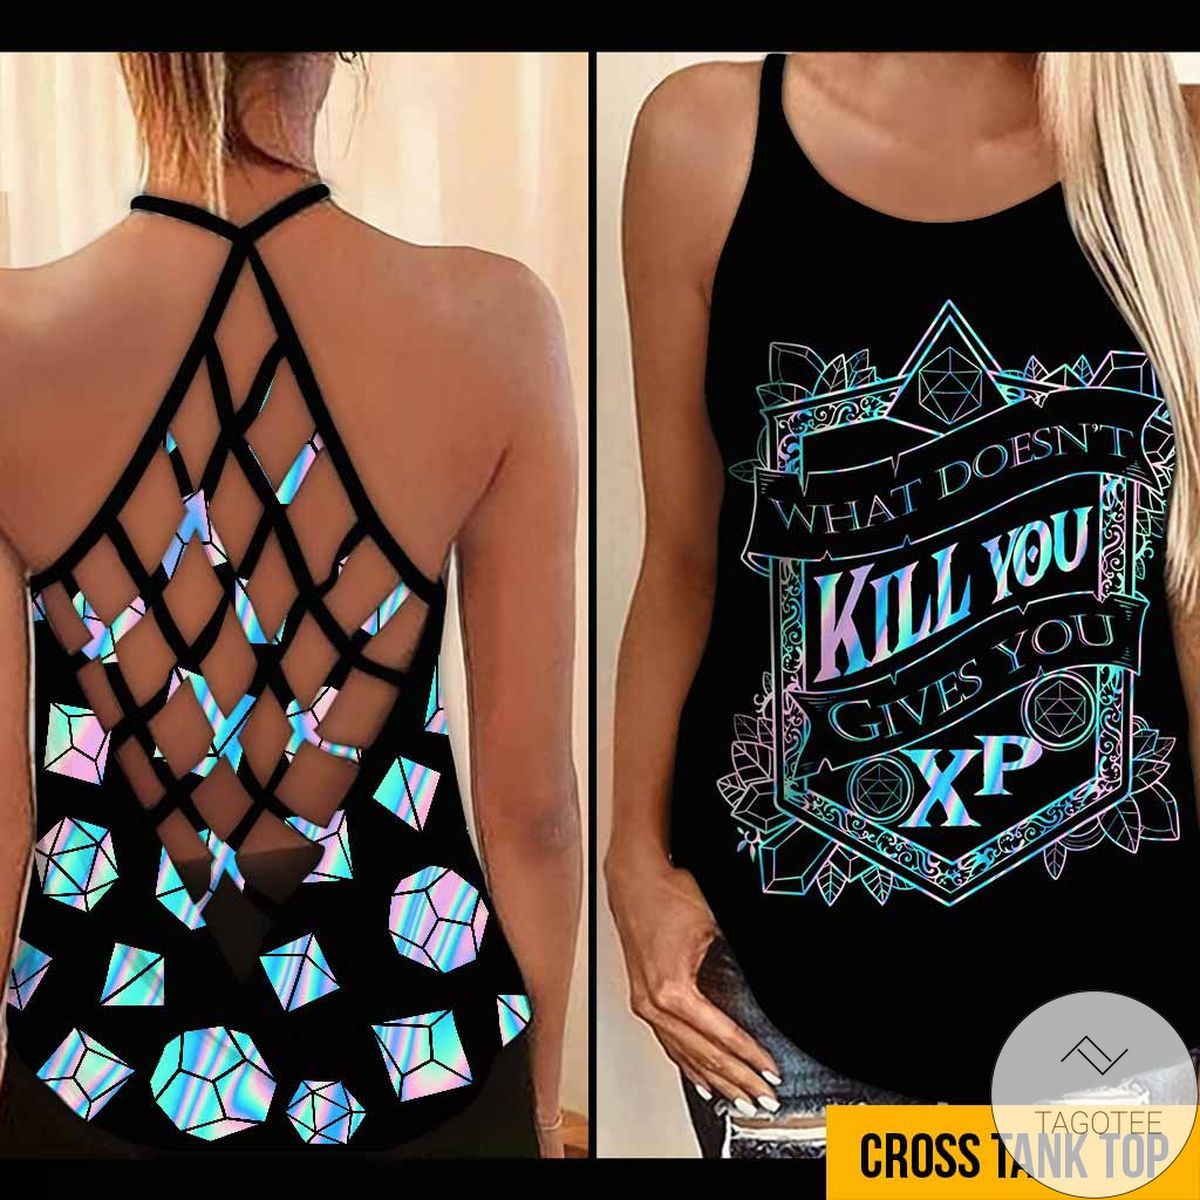 What Doesn't Kill You Gives You XP Criss Cross Tank Top